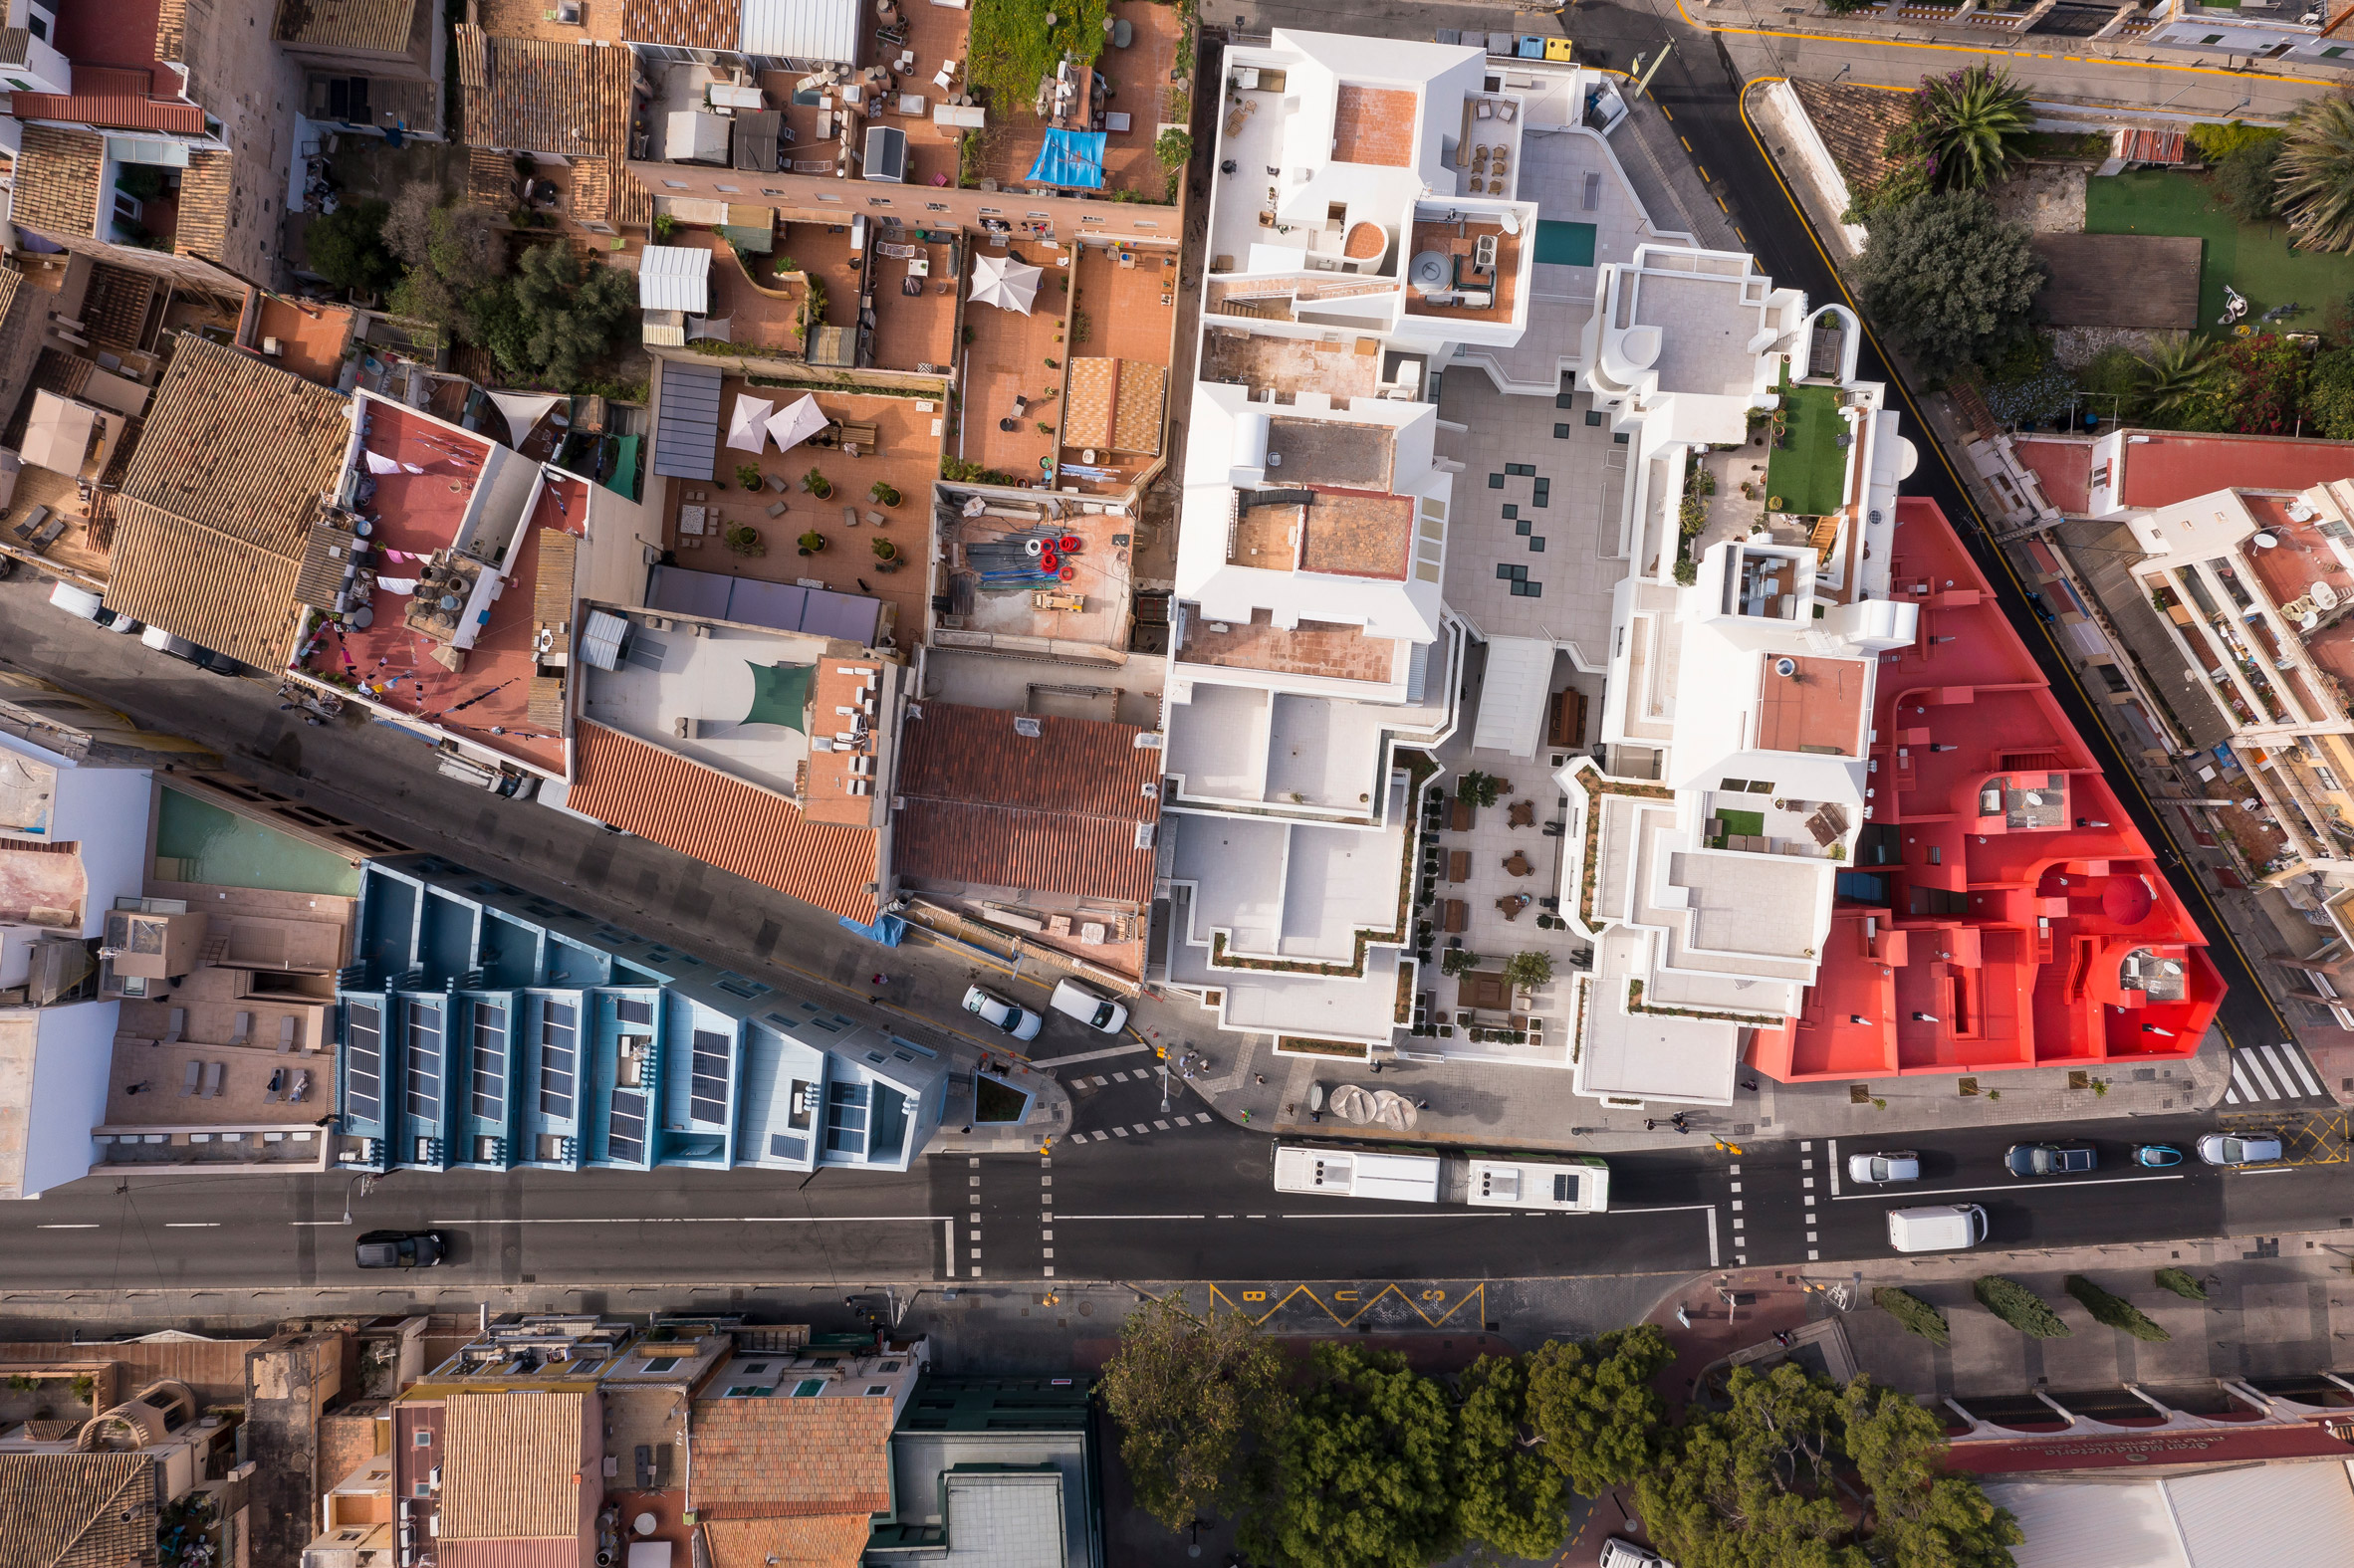 Aerial view of Project Gomila by MVRDV and GRAS Reynés Arquitectos